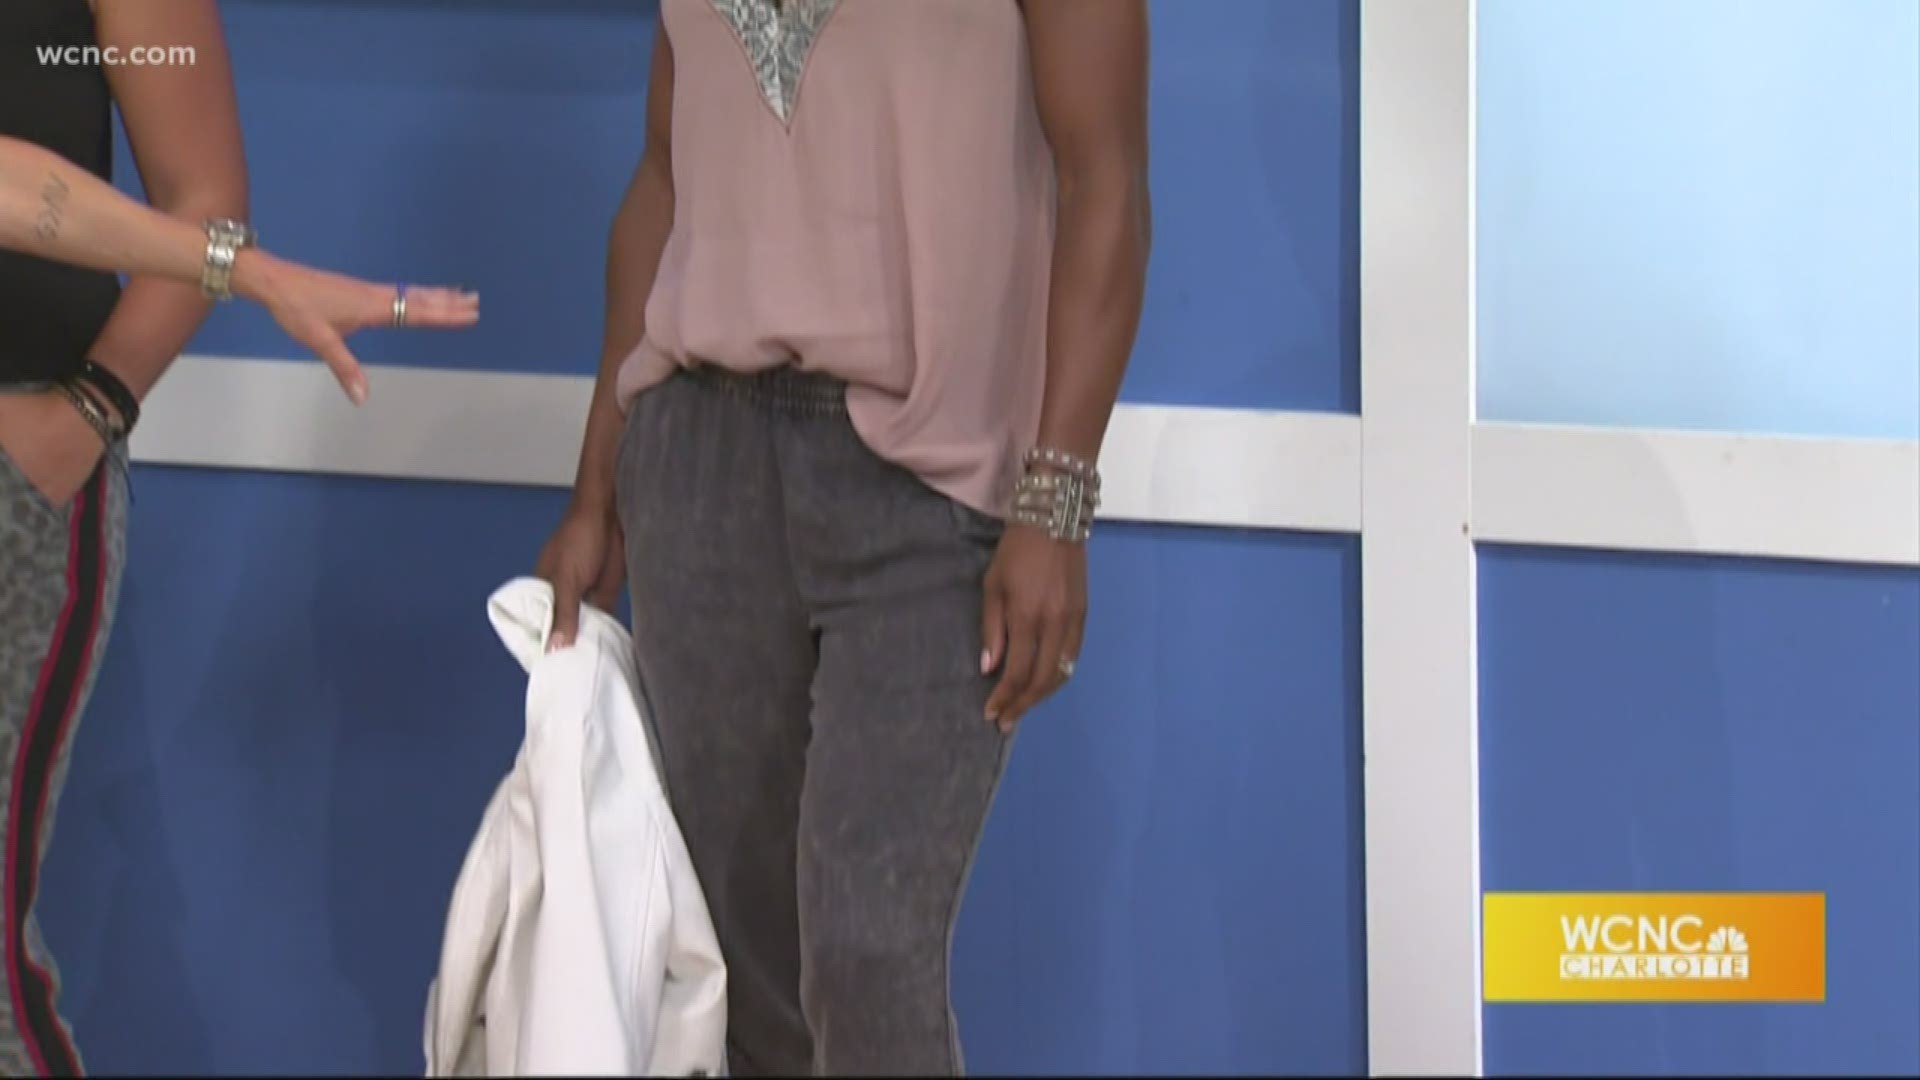 Stylist Karen Mangeney shows us how you can dress joggers up for work or a night out.